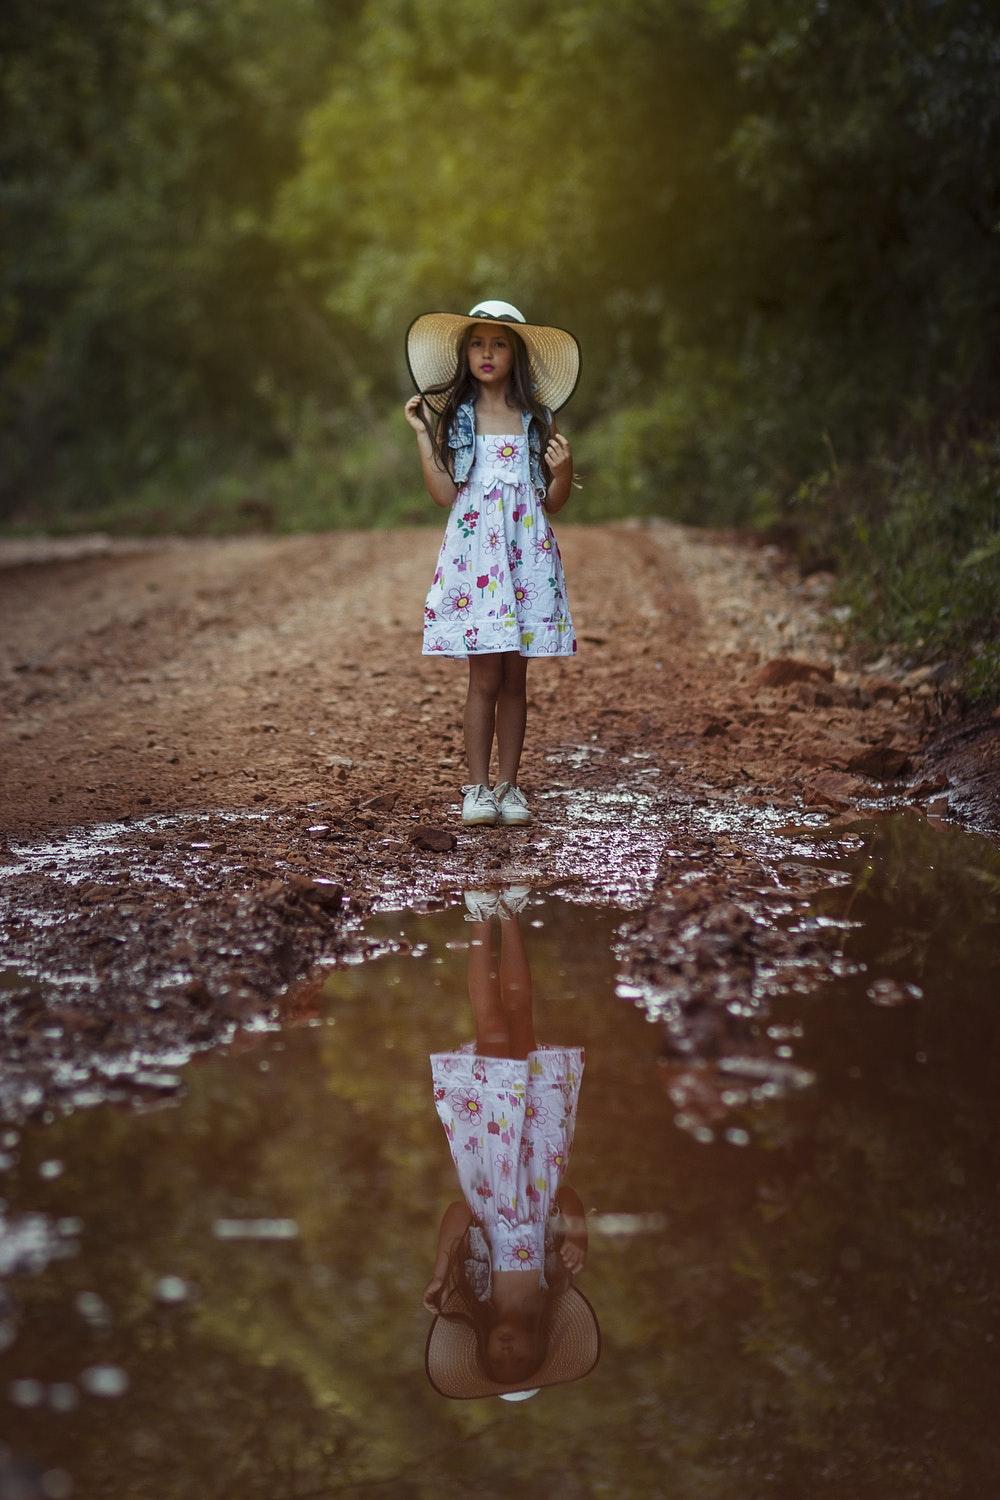 Little Girl Picture. Download Free Image